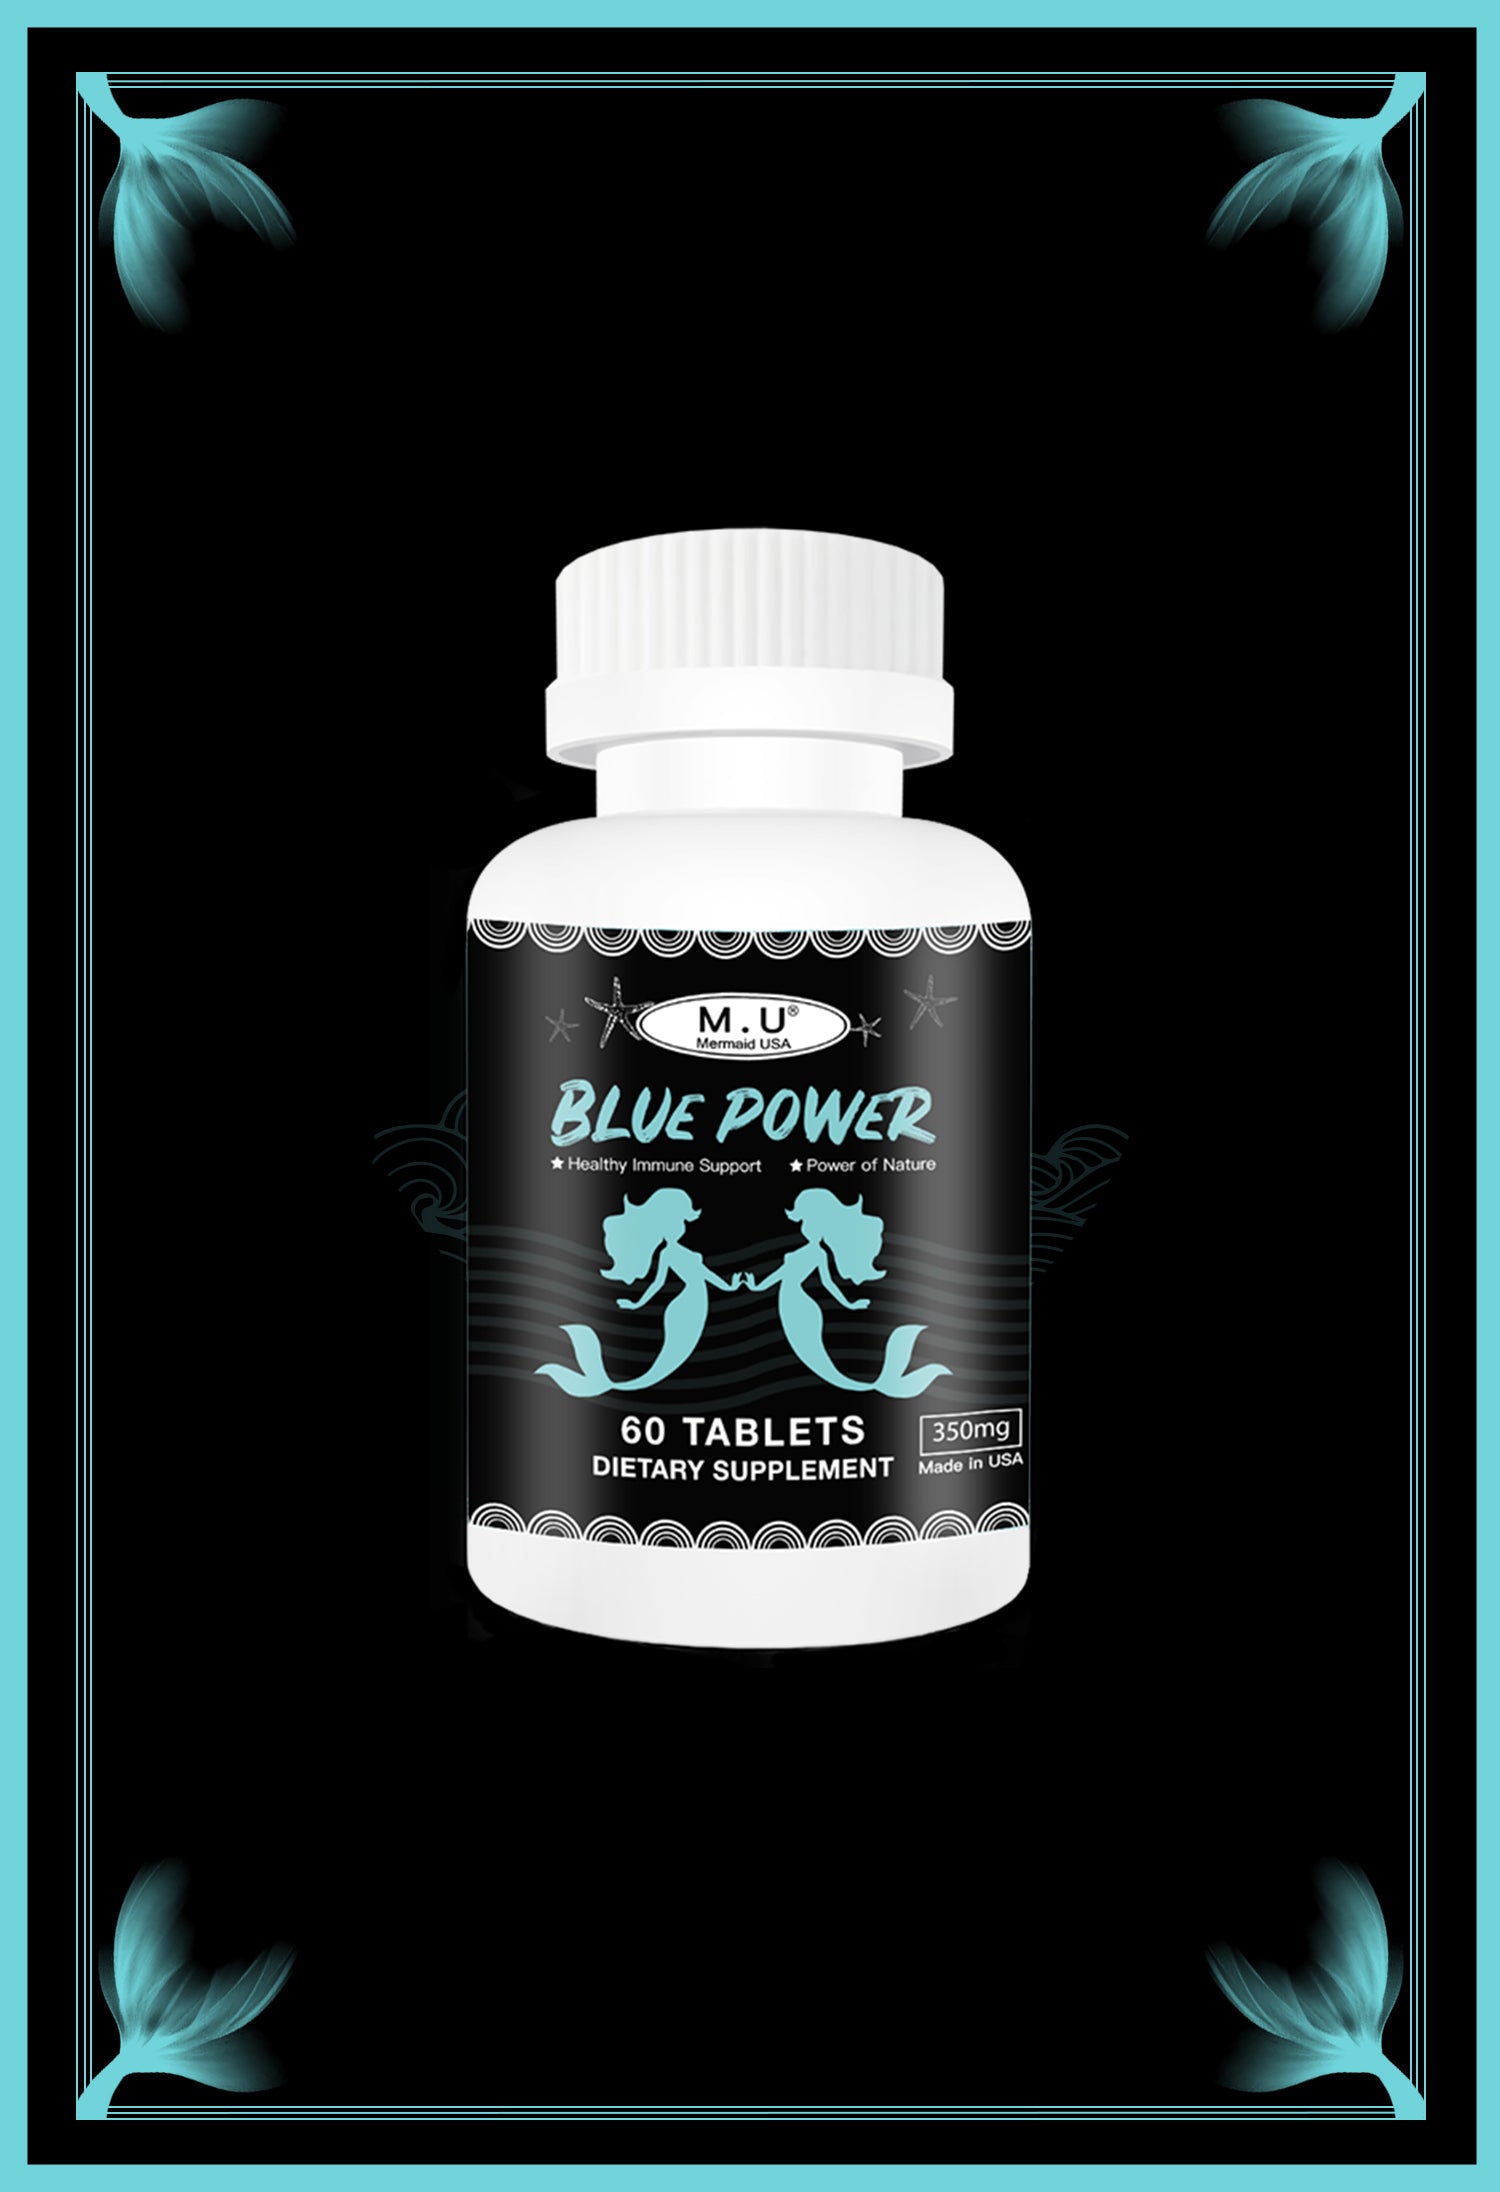 Blue Power-The ultimate Support for Immunity